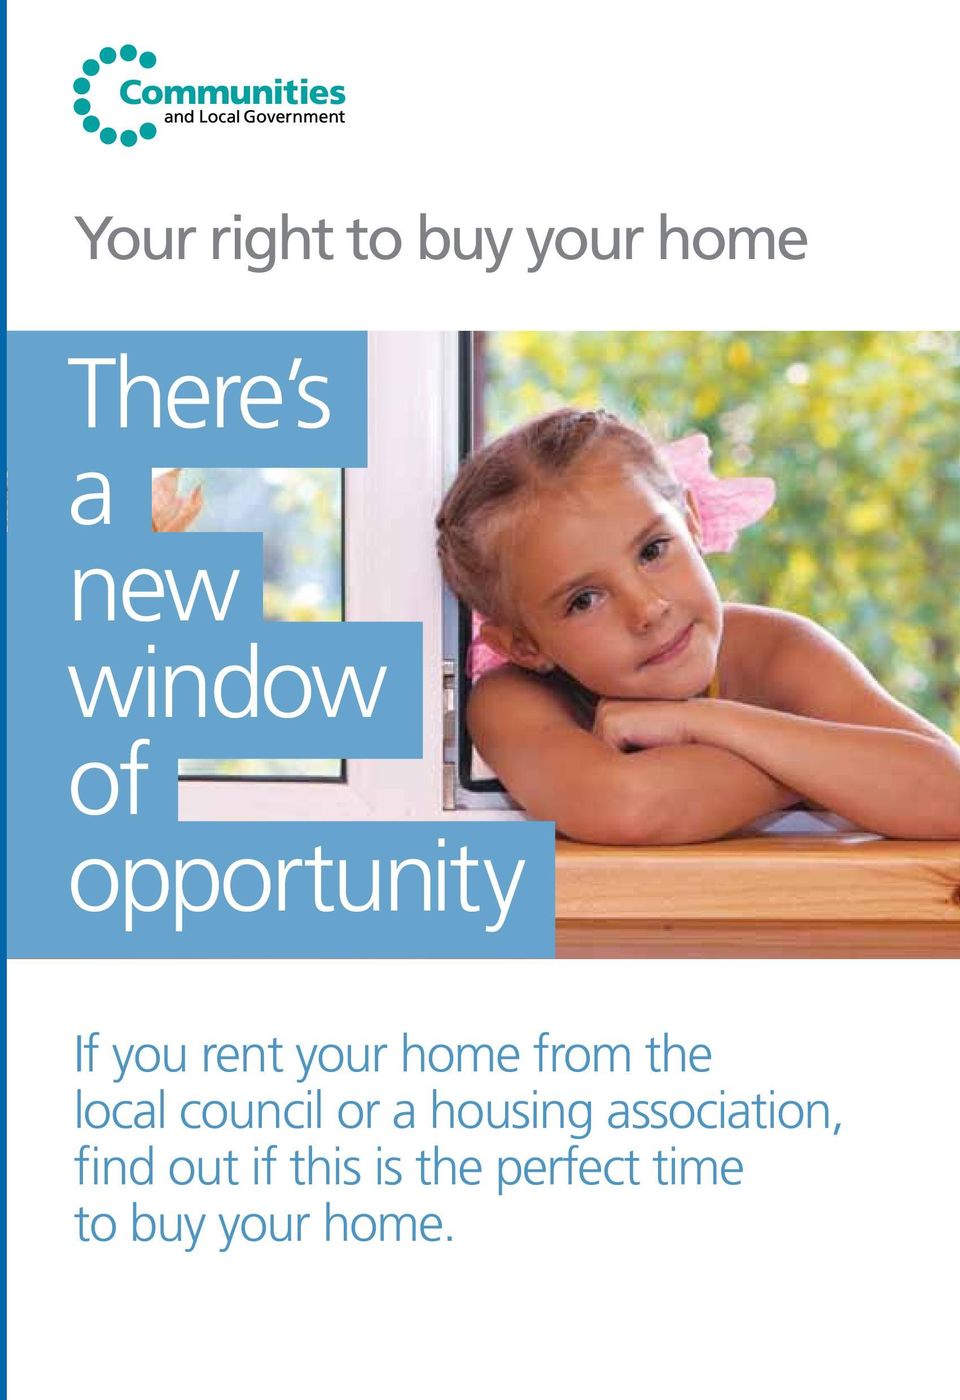 from the local council or a housing